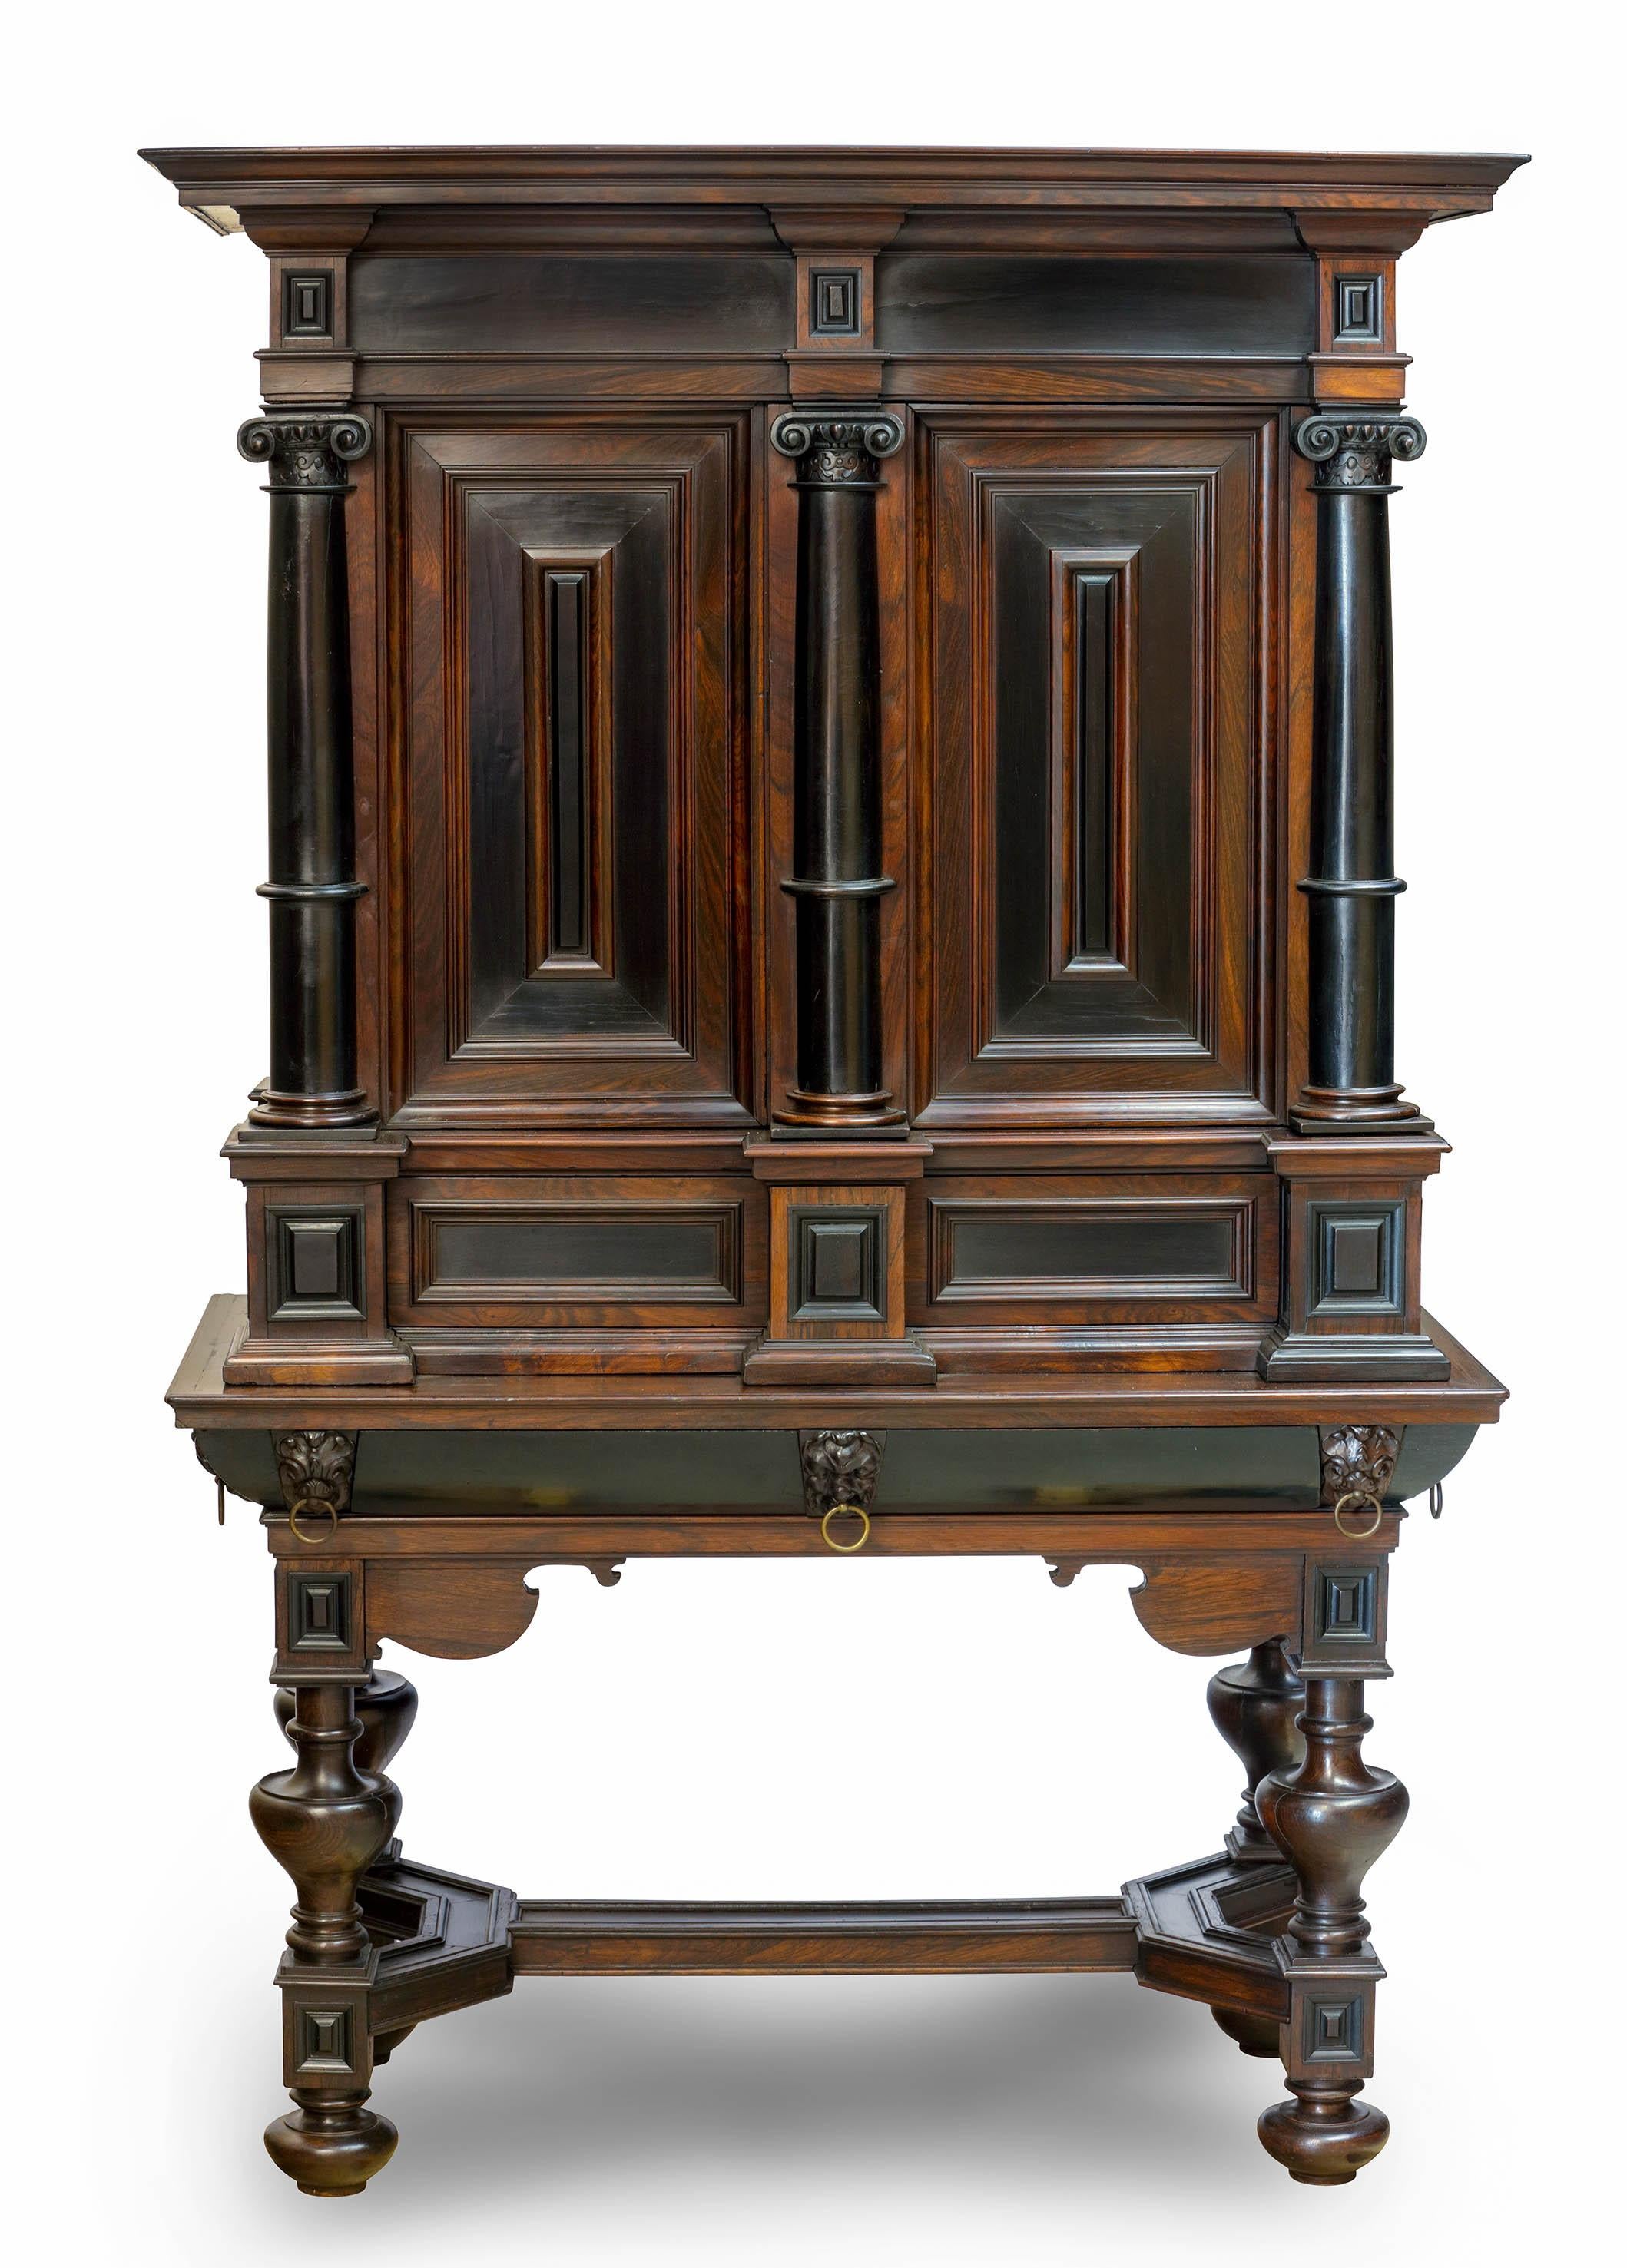 A rare Dutch Renaissance 17th-century Maternity room or Child's cabinet, in Dutch called 'Luiermandskast'

circa 1650, possibly the circle of Herman Doomer

A 'luiermandskast' is a quite rare piece of Dutch furniture. A luiermandskast was